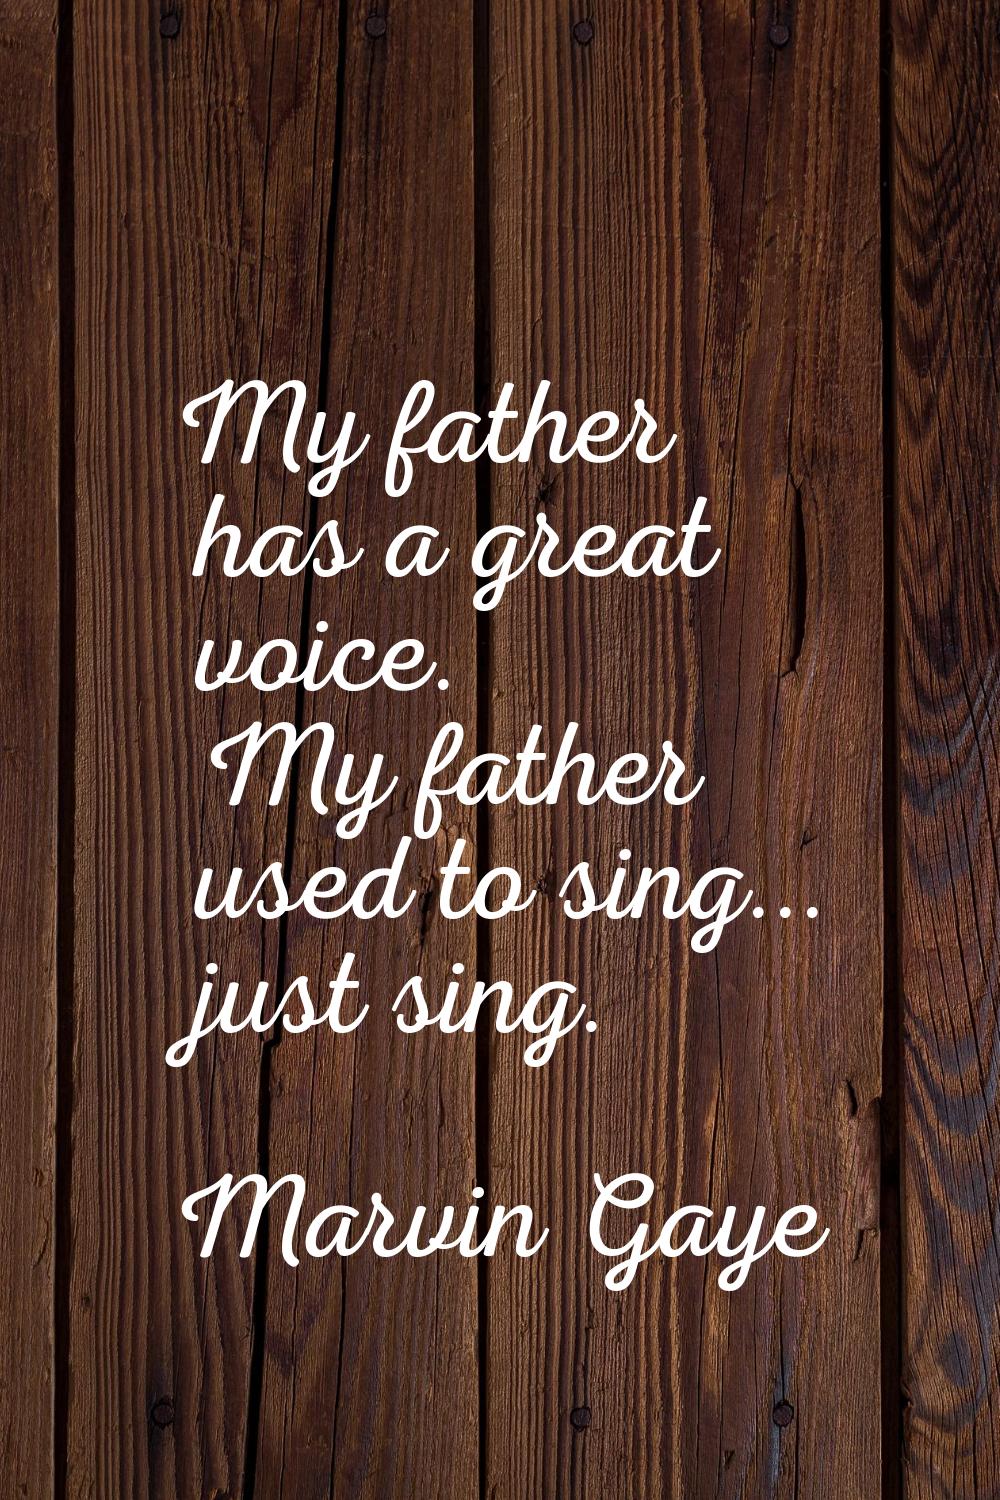 My father has a great voice. My father used to sing... just sing.